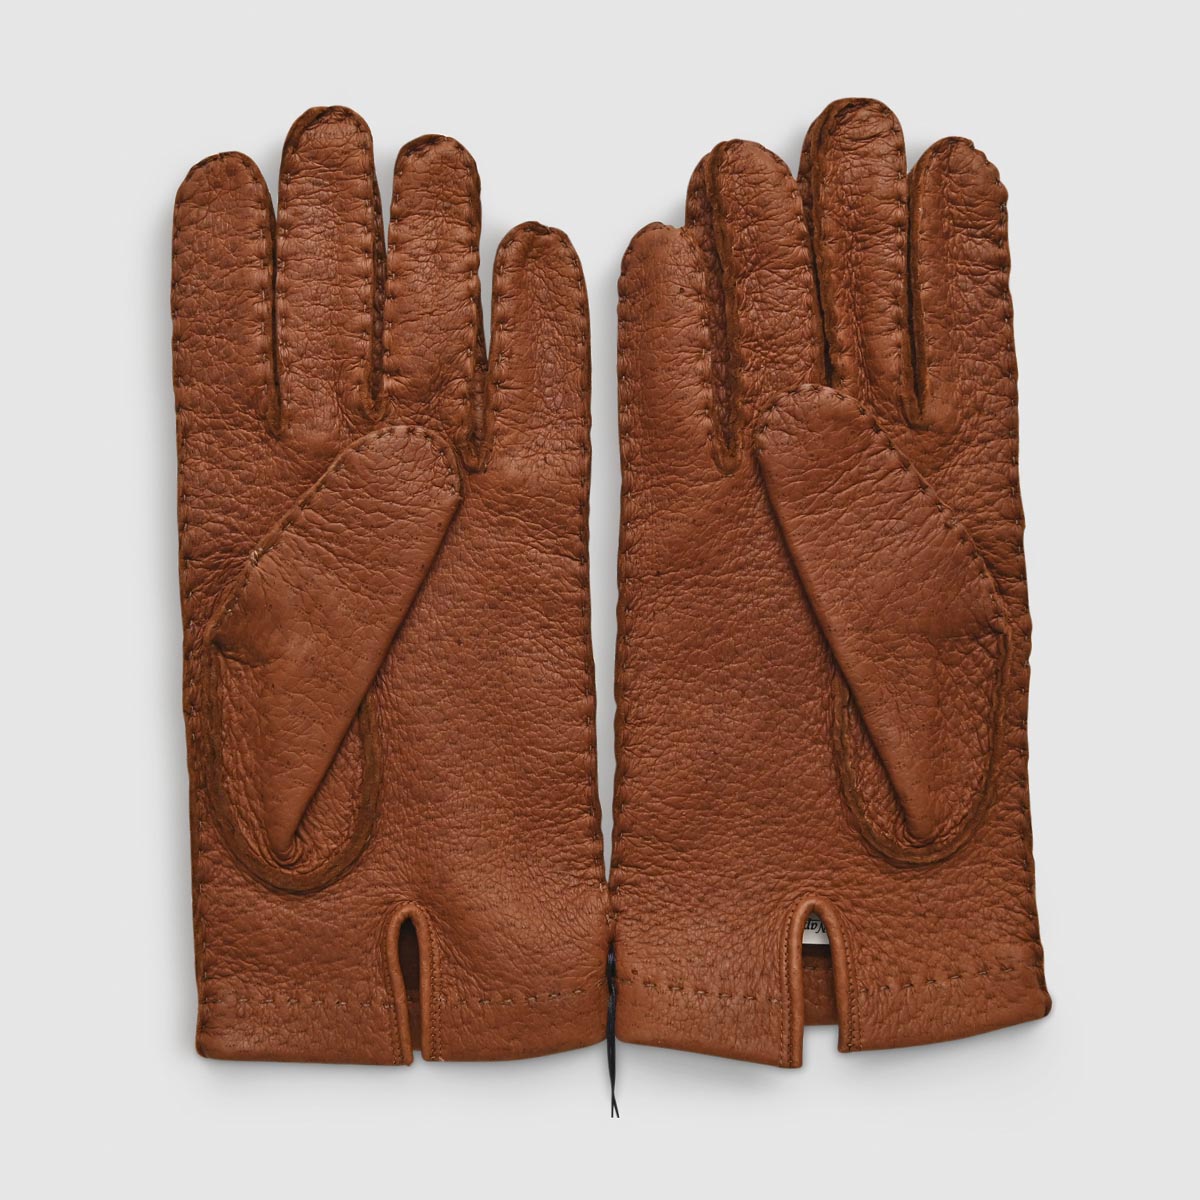 Omega Tabacco Unlined Peccary Leather Glove Omega SRL on sale 2022 2